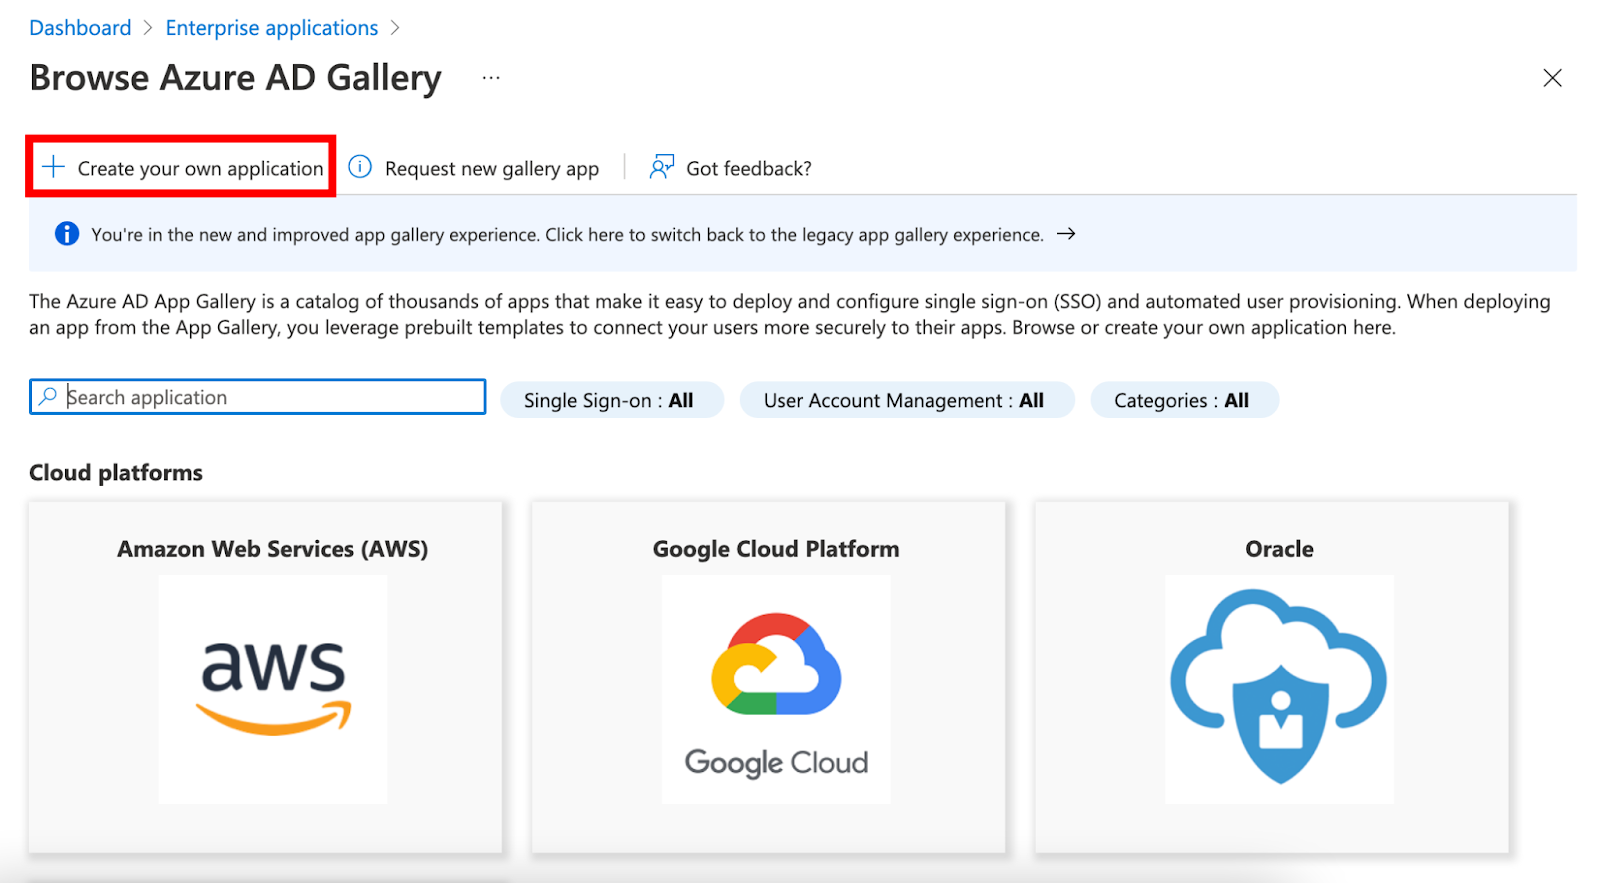 Azure AD gallery page with "create your own application" button highlighted.